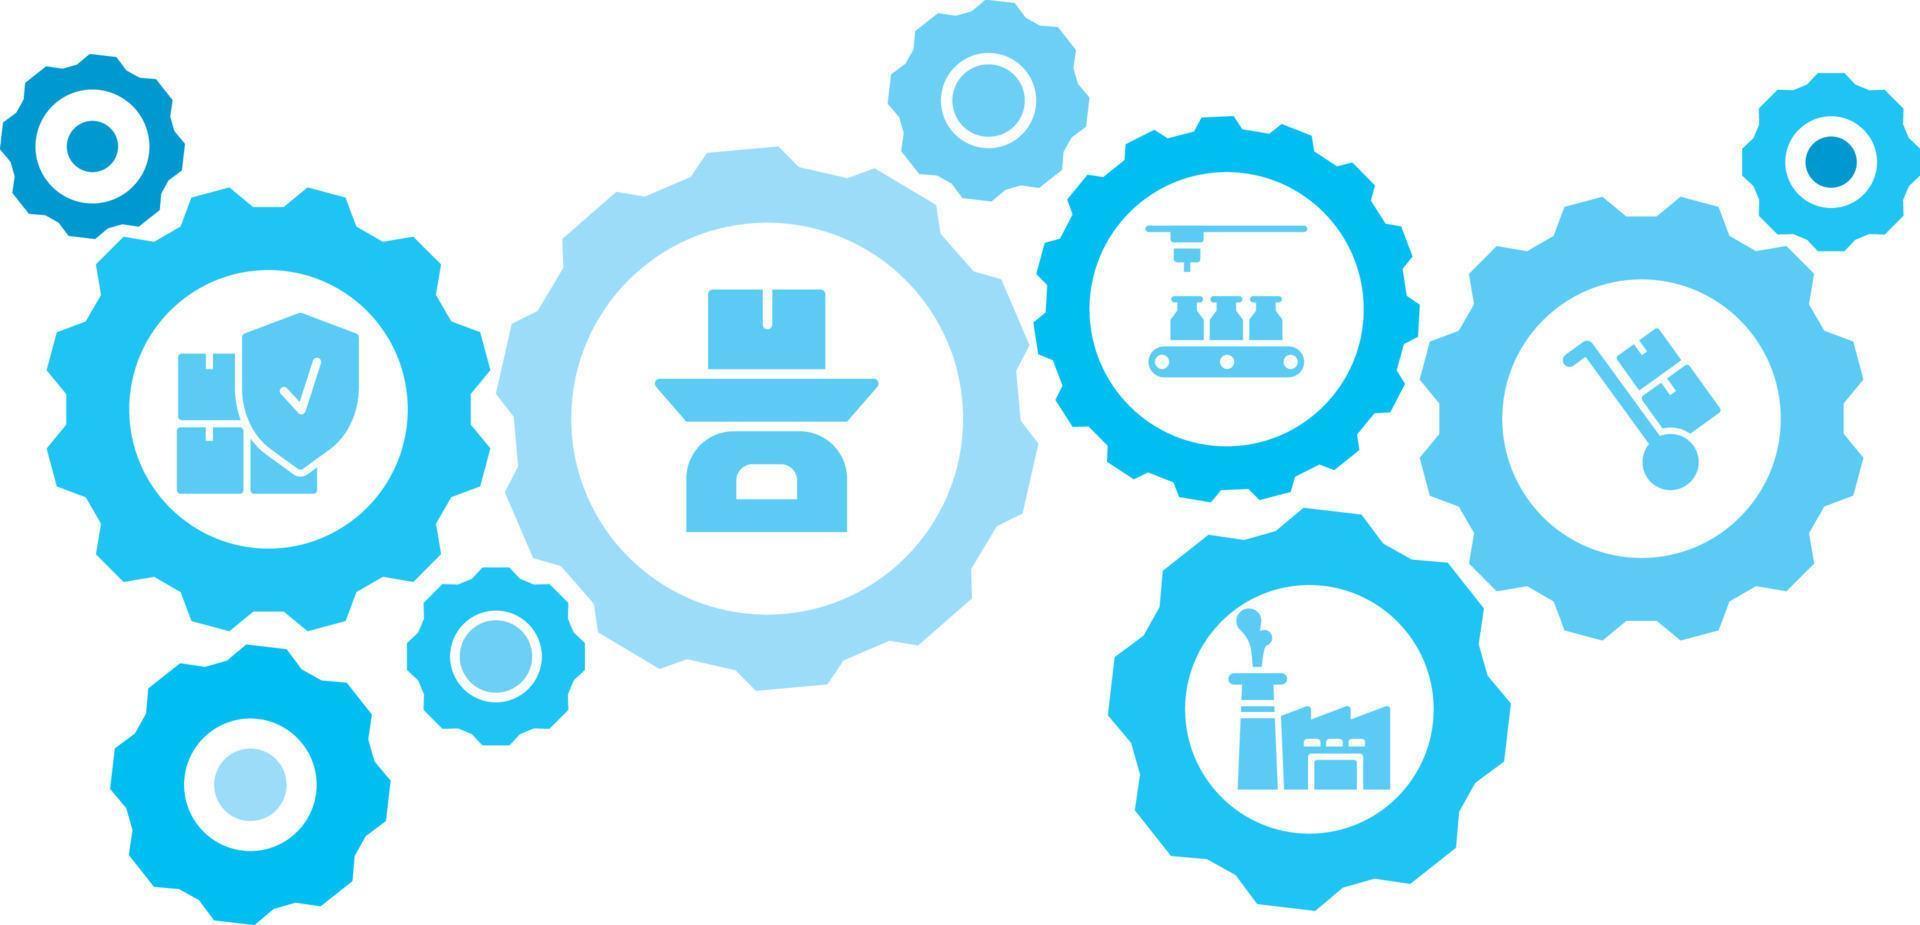 Connected gears and vector icons for logistic, service, shipping, distribution, transport, market, communicate concepts. Mass, production, trolley gear blue icon set on white background